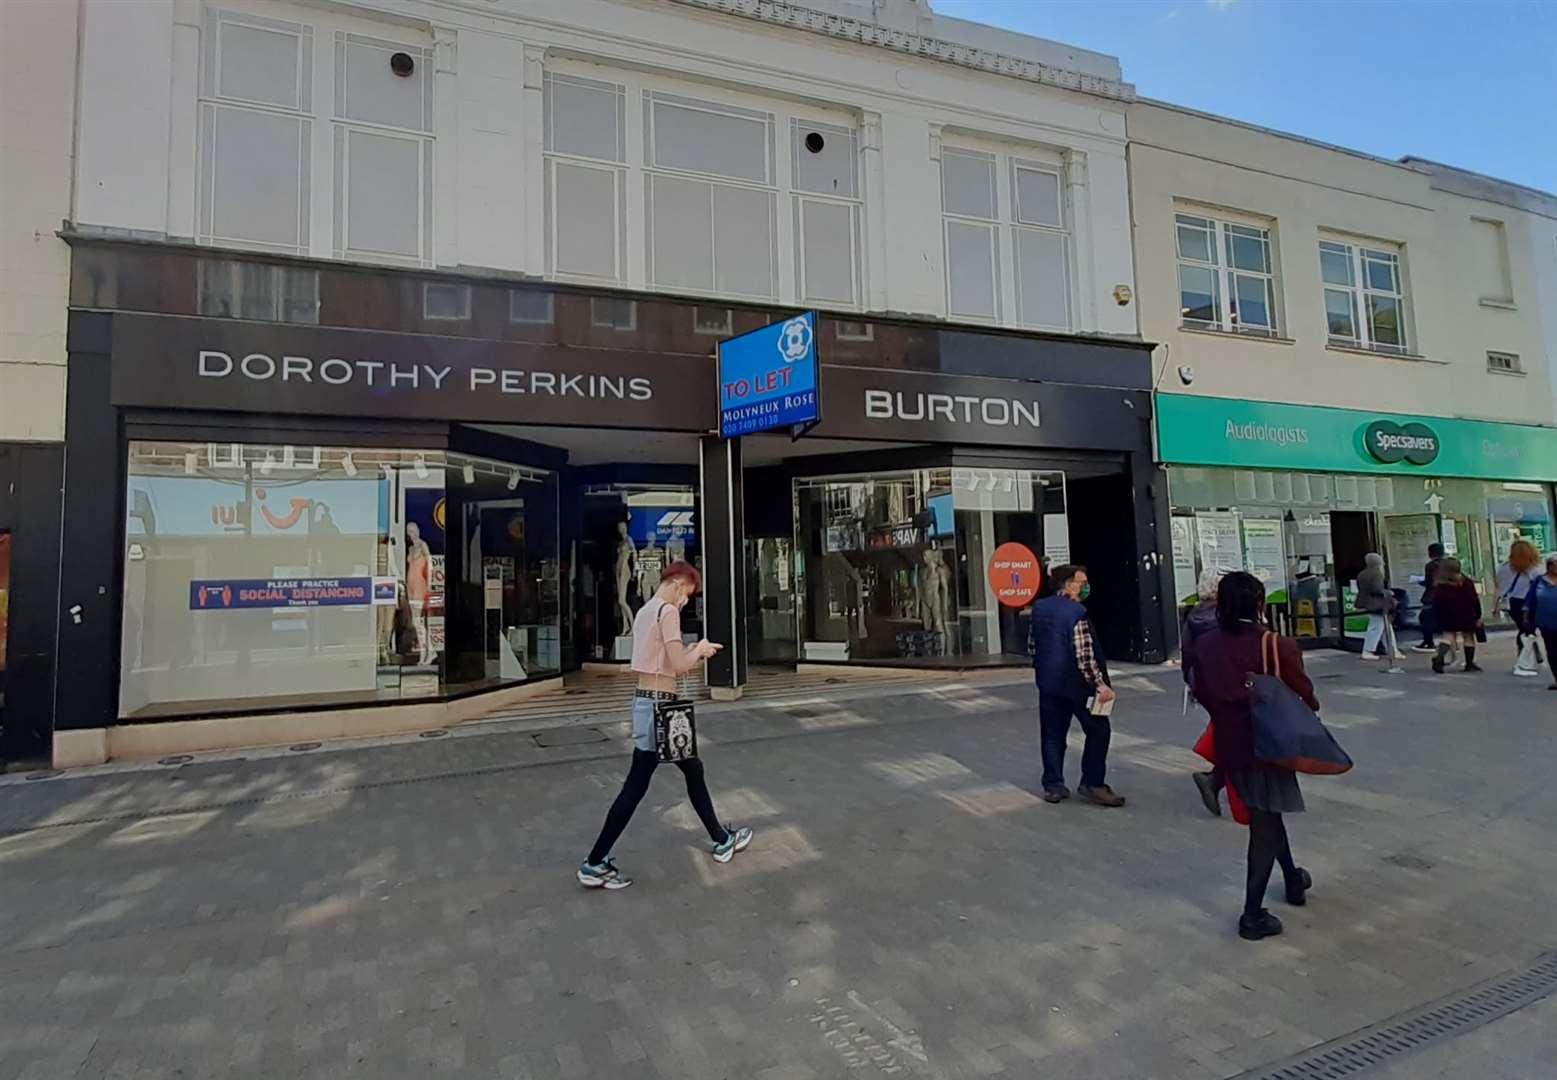 Some shops in Maidstone have closed for good during the pandemic